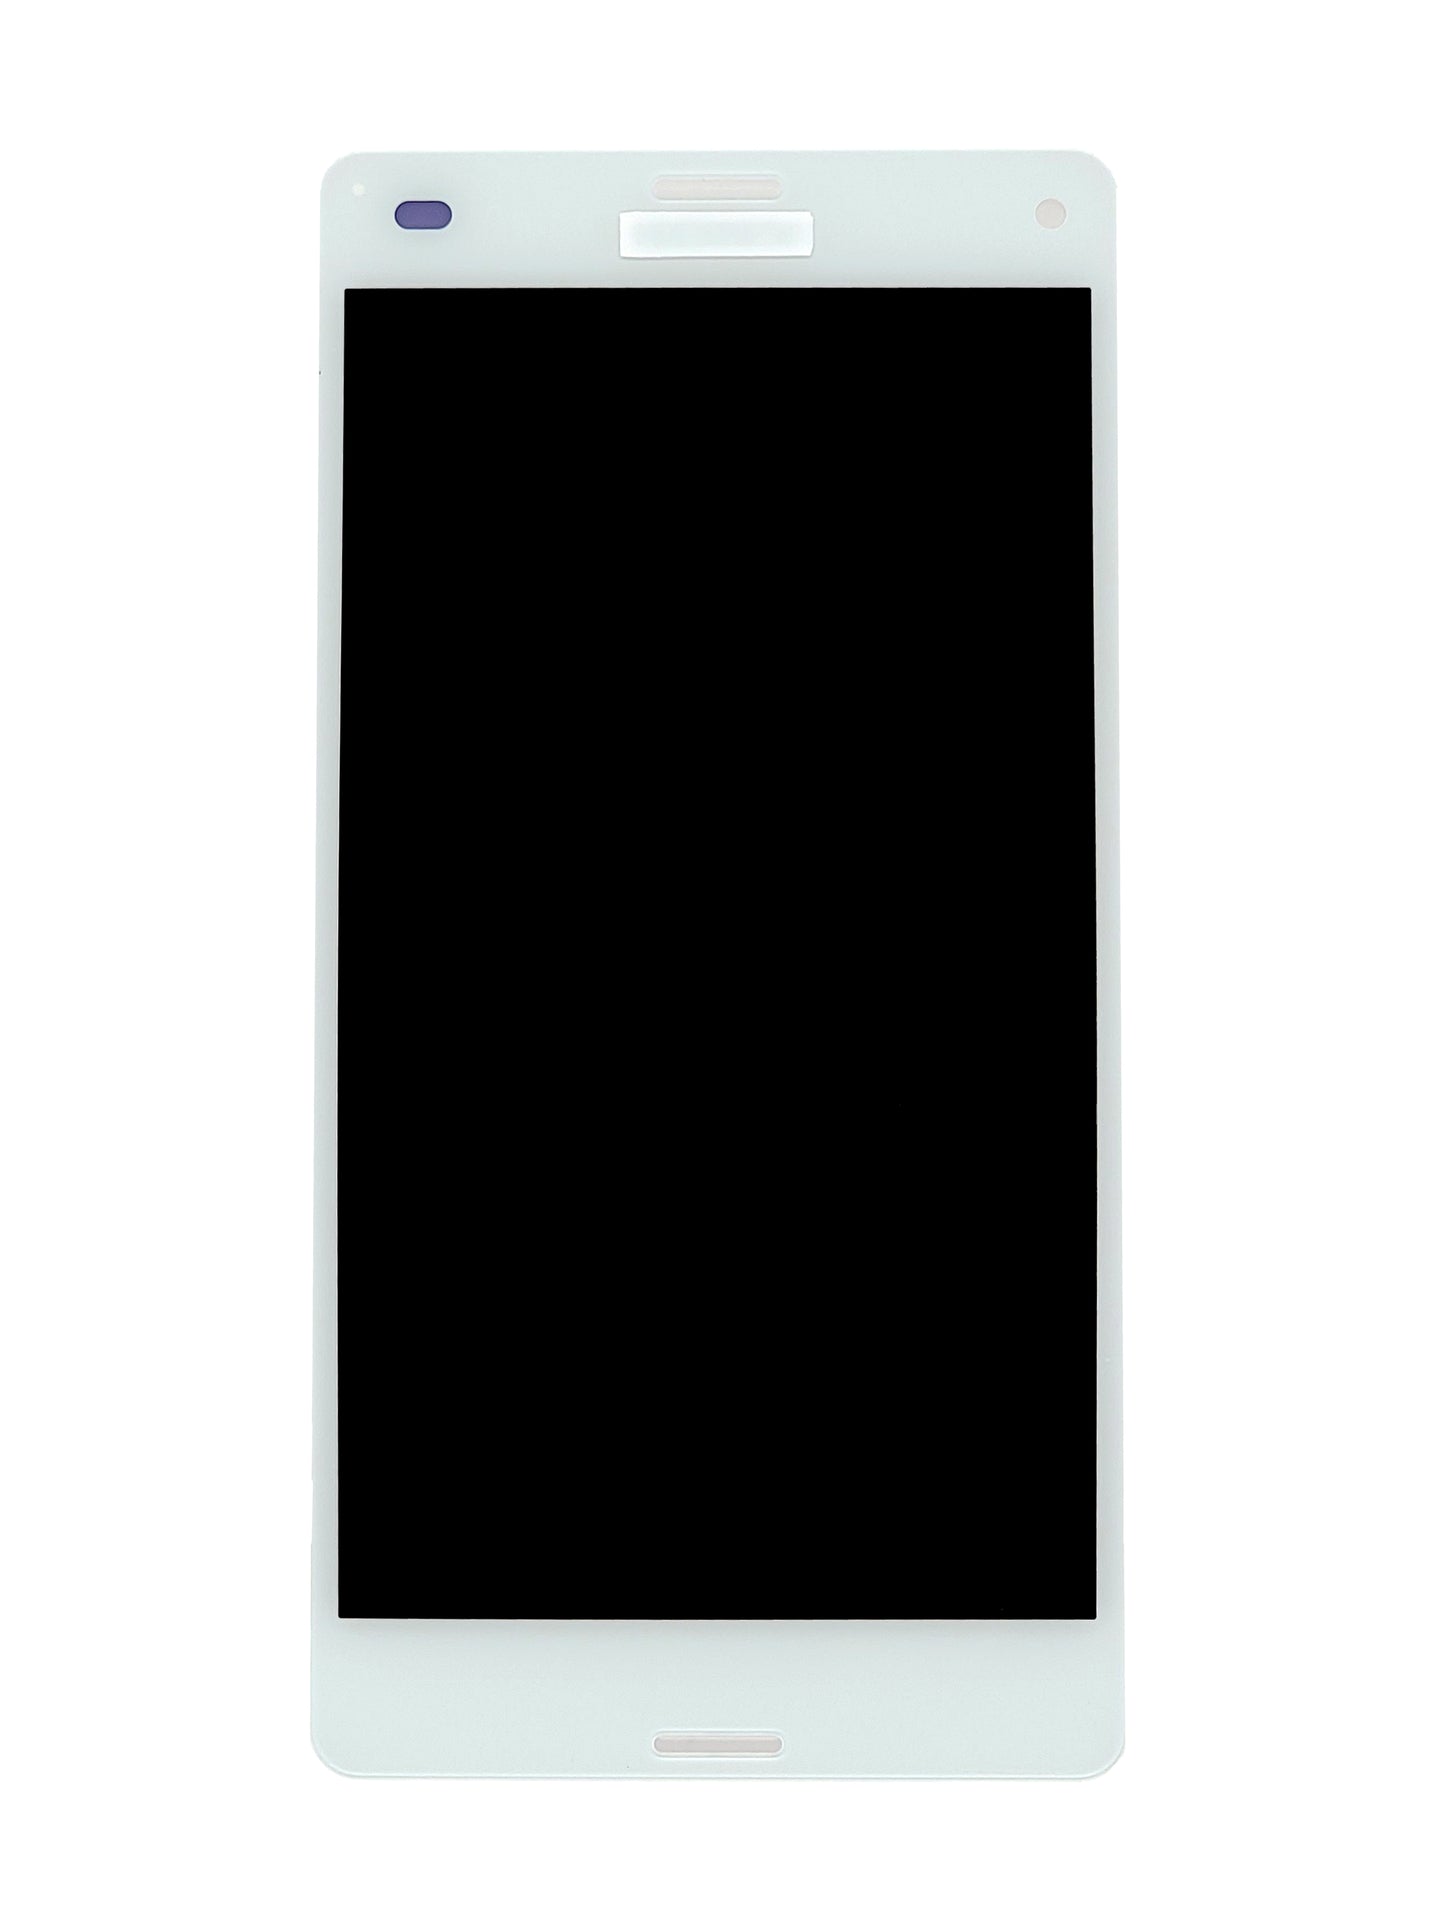 SXZ Xperia Z3 Mini / Compact Screen Assembly (Without The Frame) (Refurbished) (White)